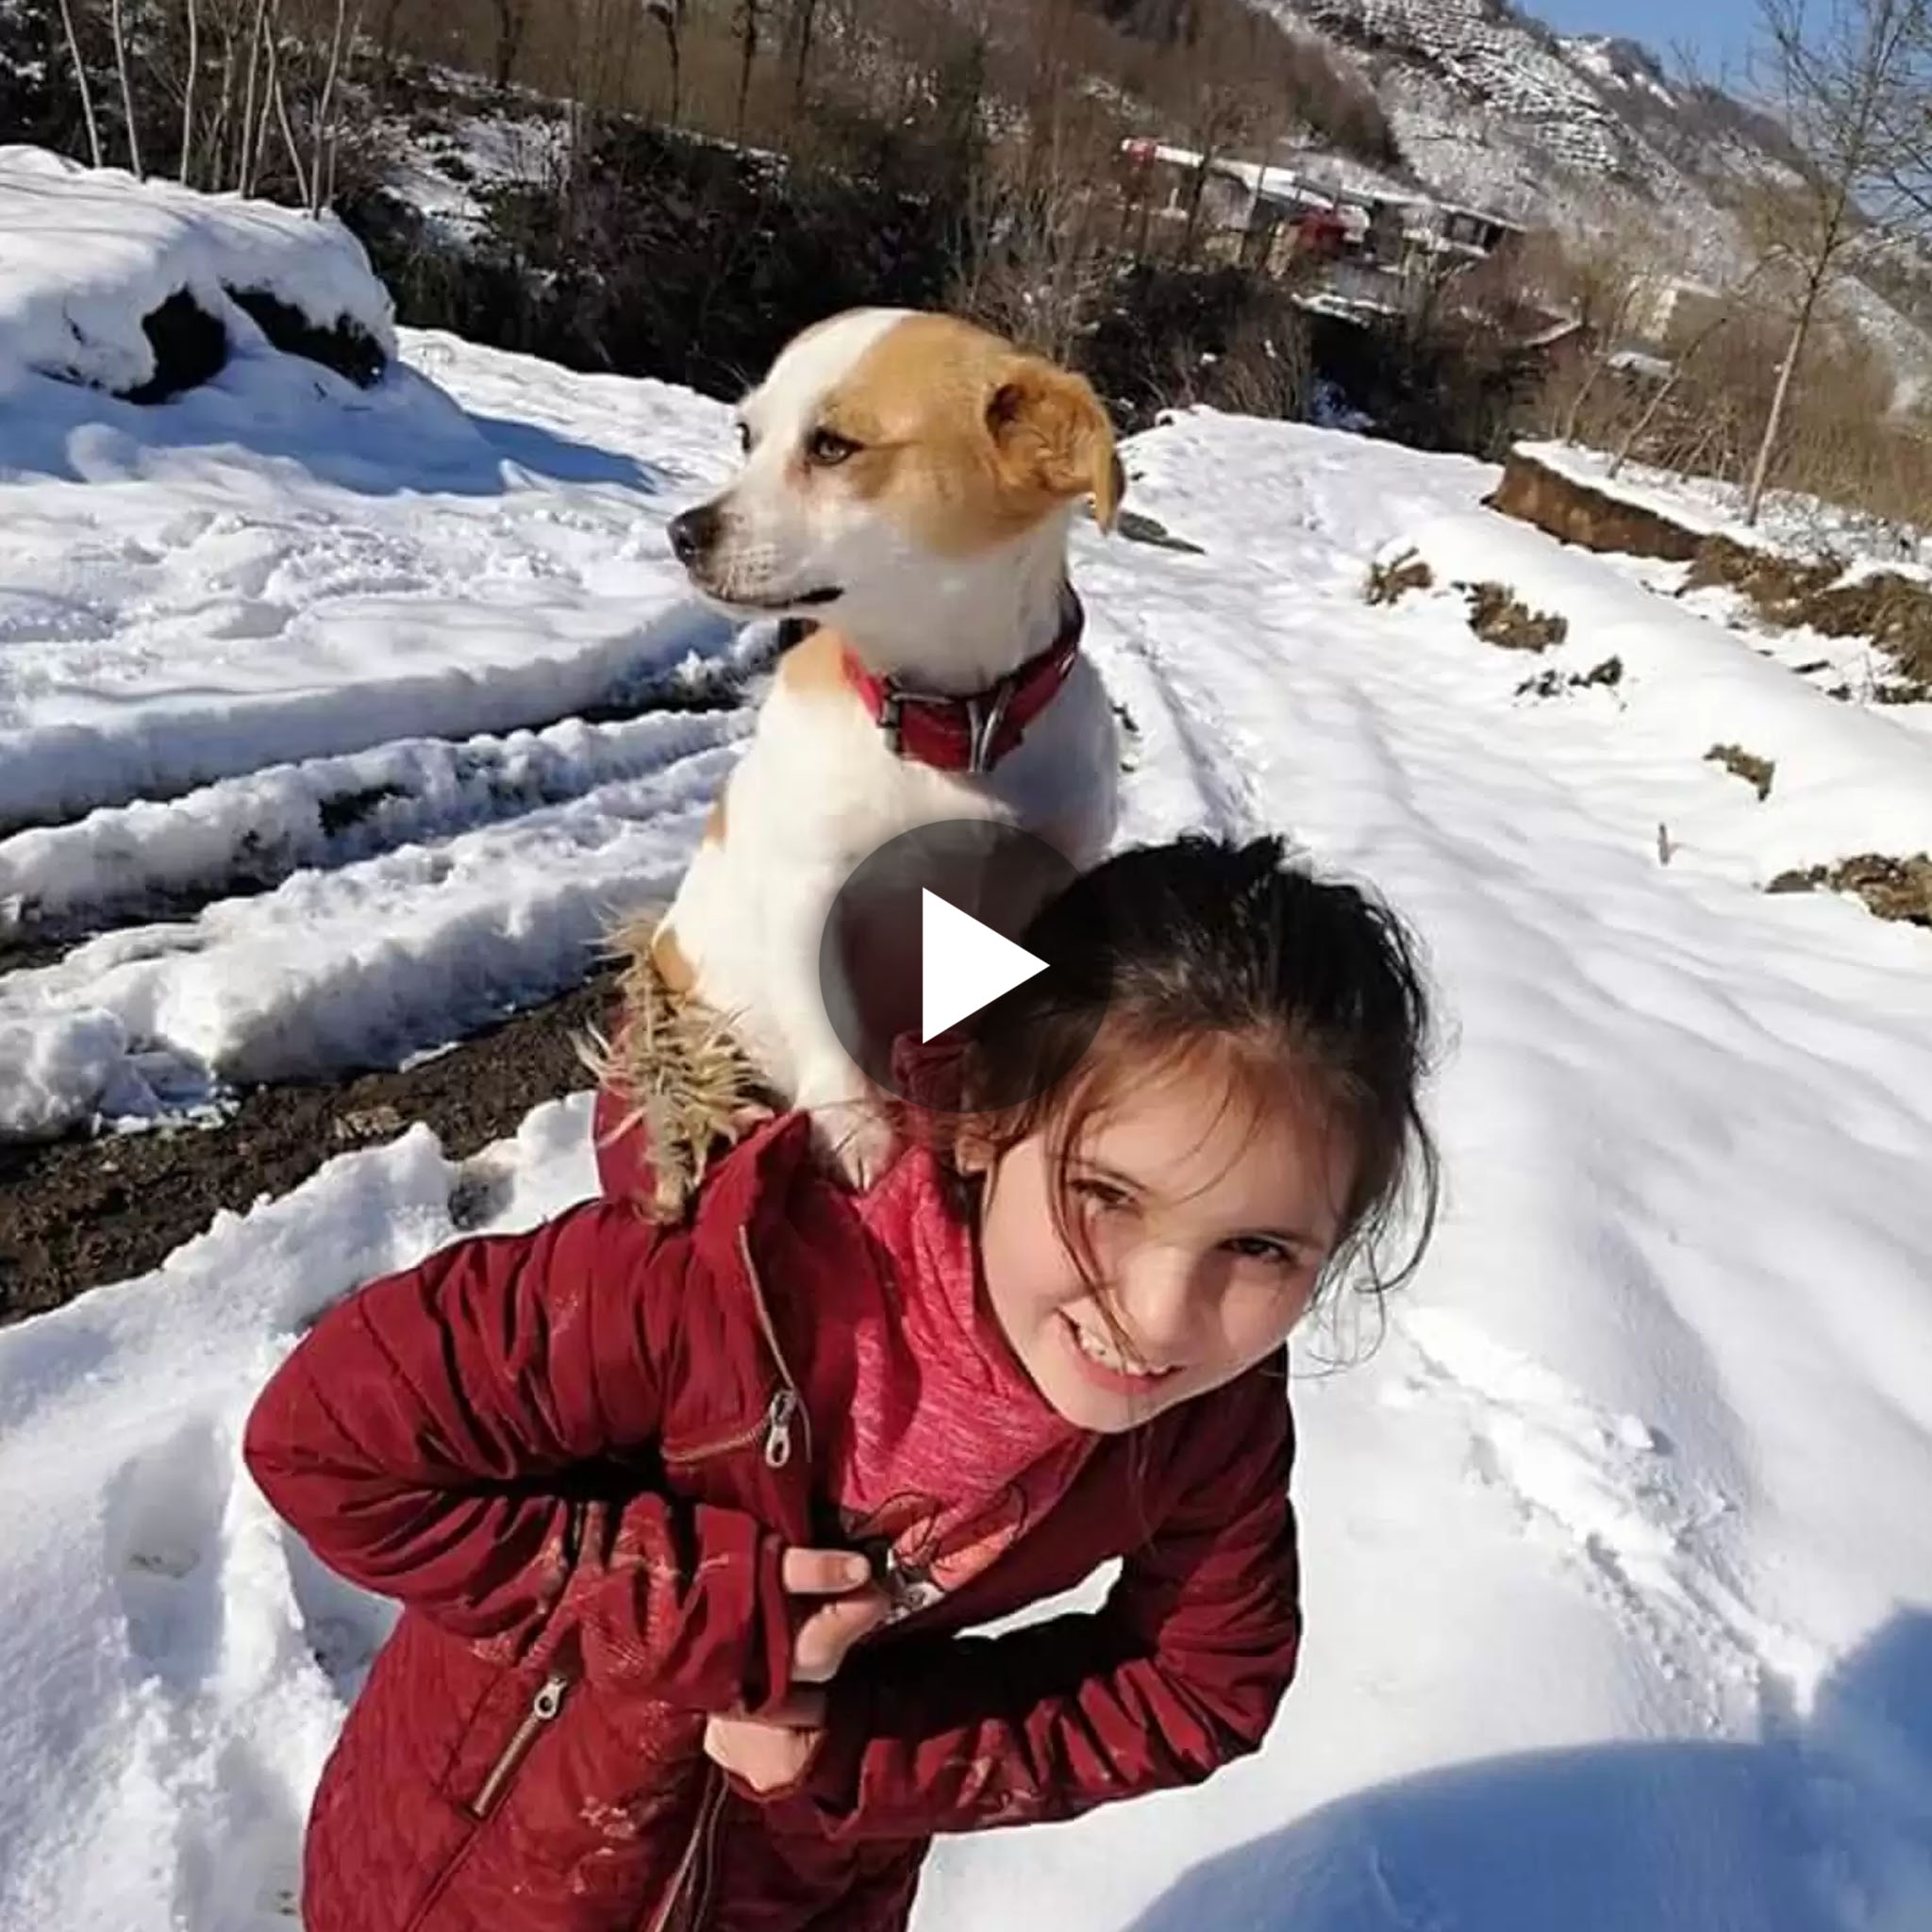 A Small Girl’s Heroic Journey Through the Thick Snow to Seek Urgent Assistance for Her Ailing Canine Companion